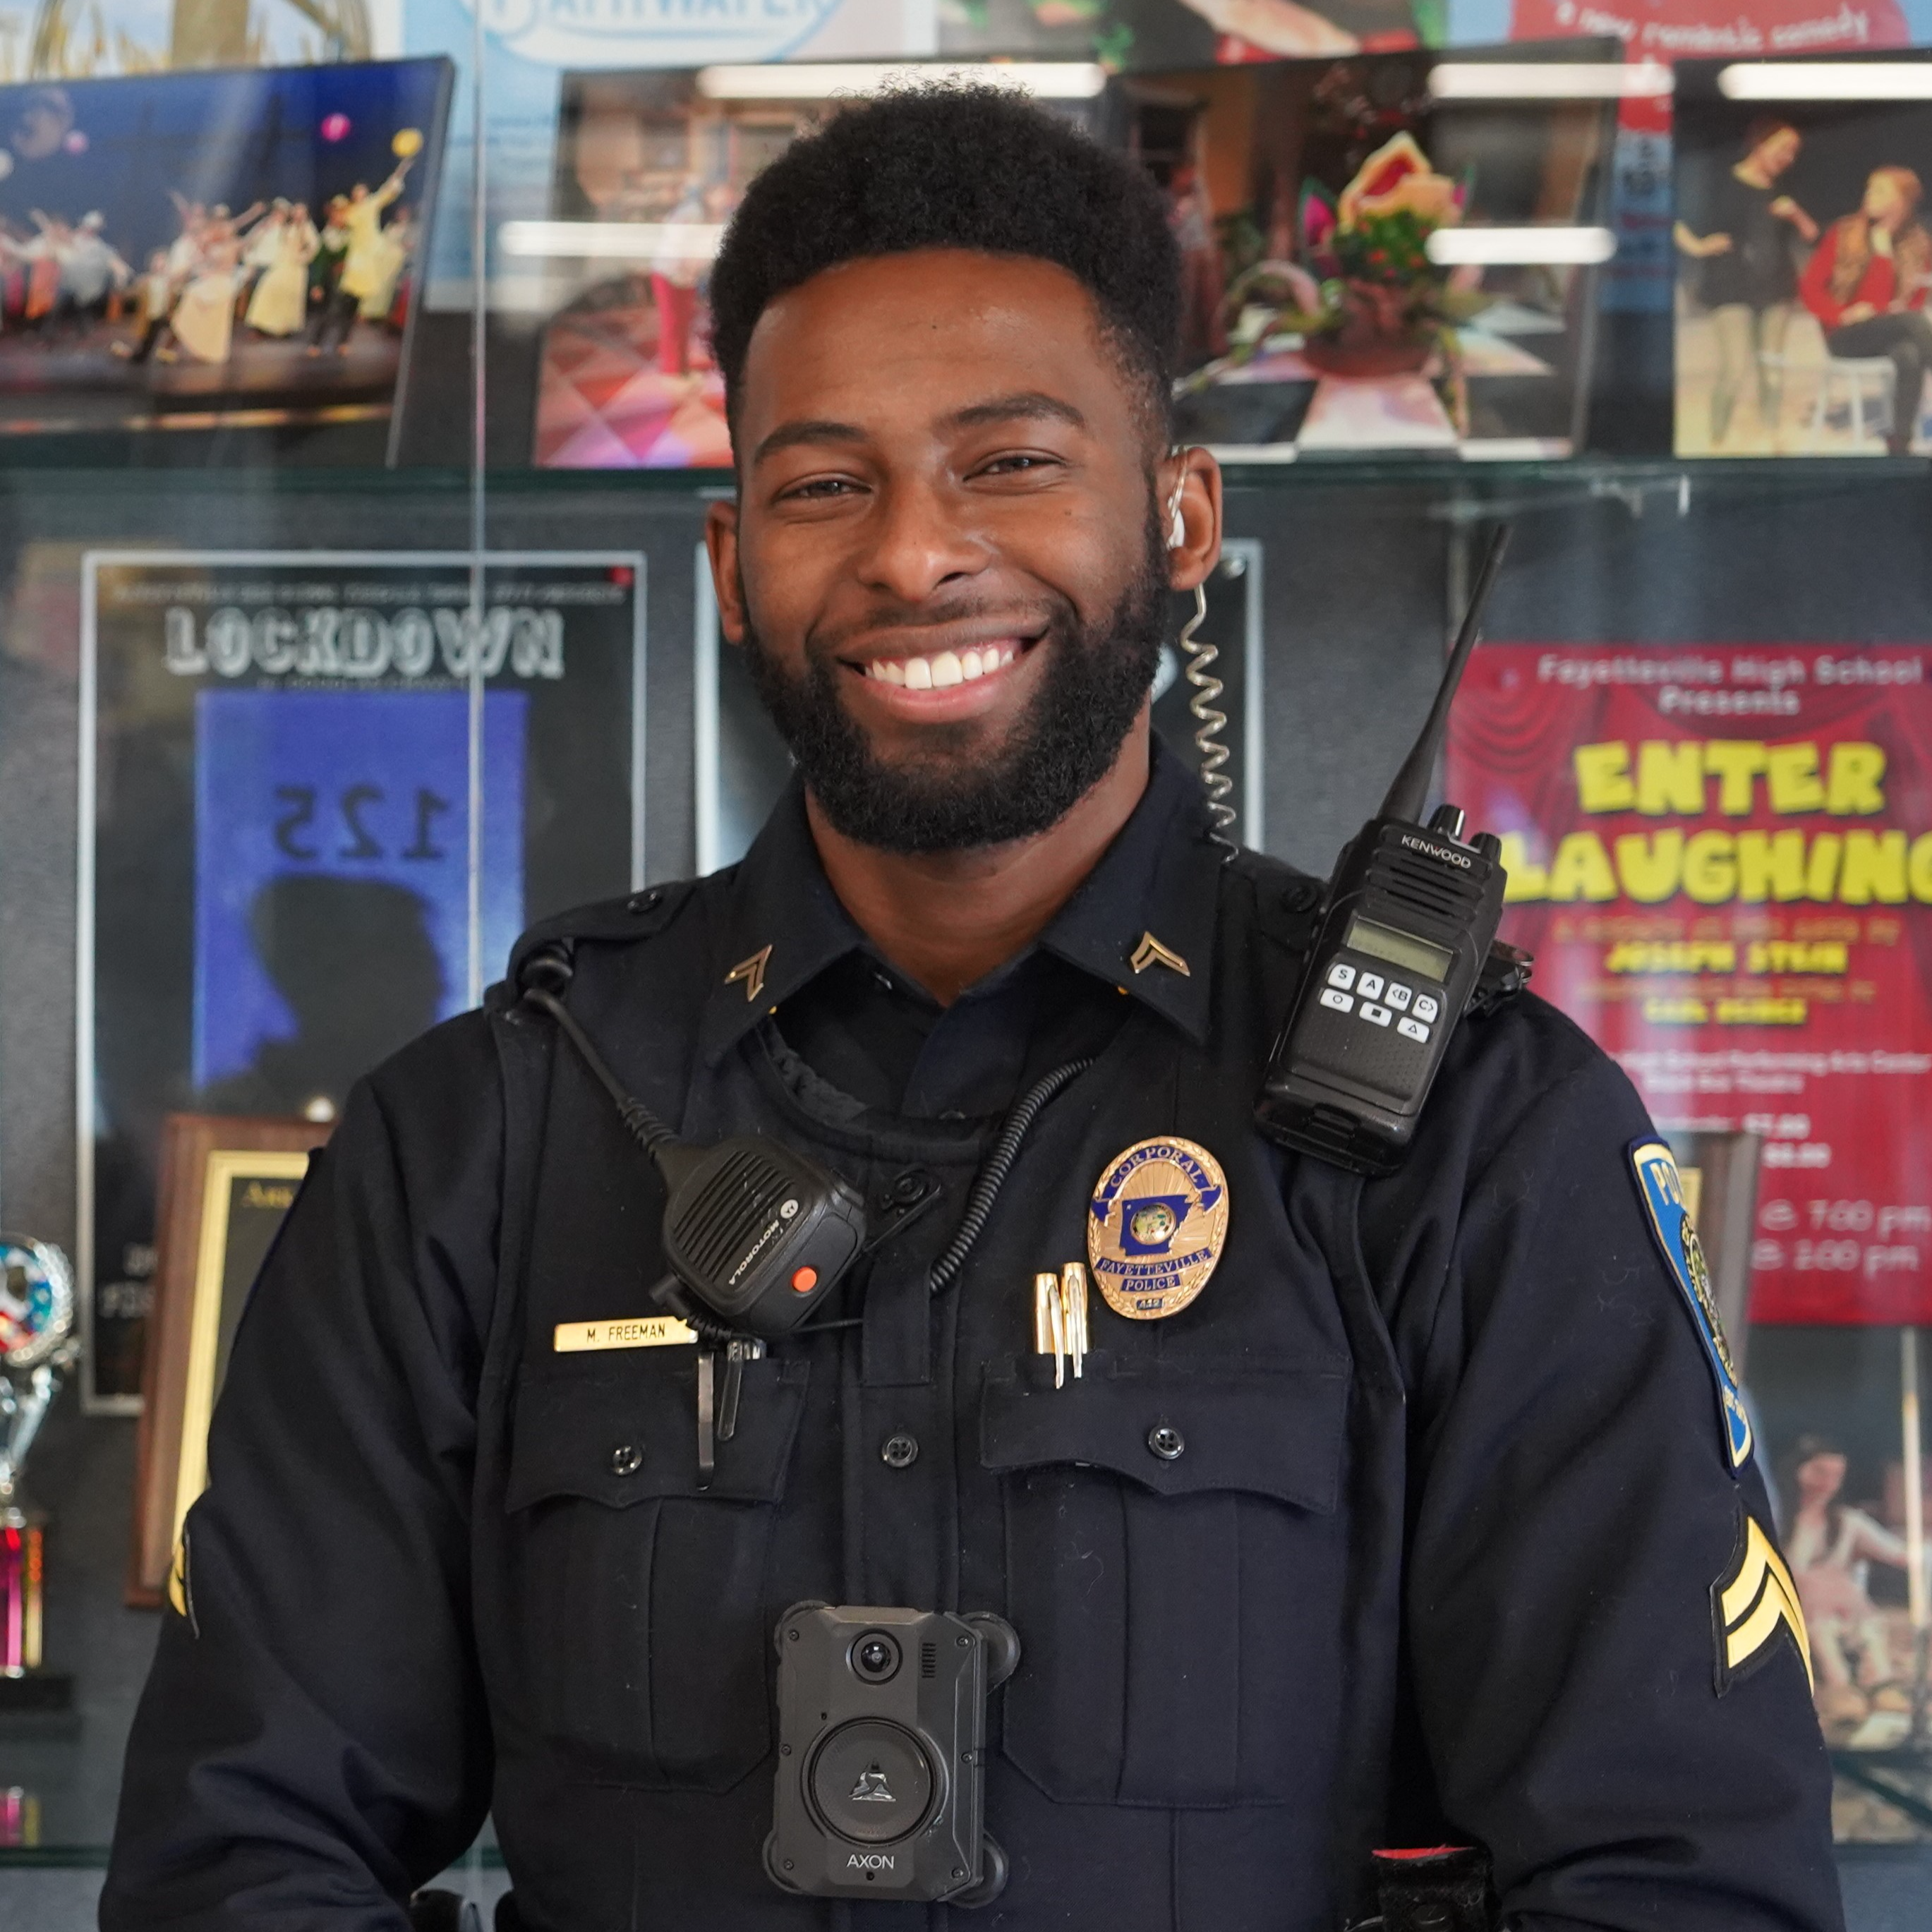 Meet Corporal Malik Freeman! Cpl. Freeman is one of two Student Resource Officers (SRO) at Fayetteville High School and assists with coverage of Leverett Elementary, the Stephen M. Percival Adult Education Program, and the Fayetteville Virtual Academy.